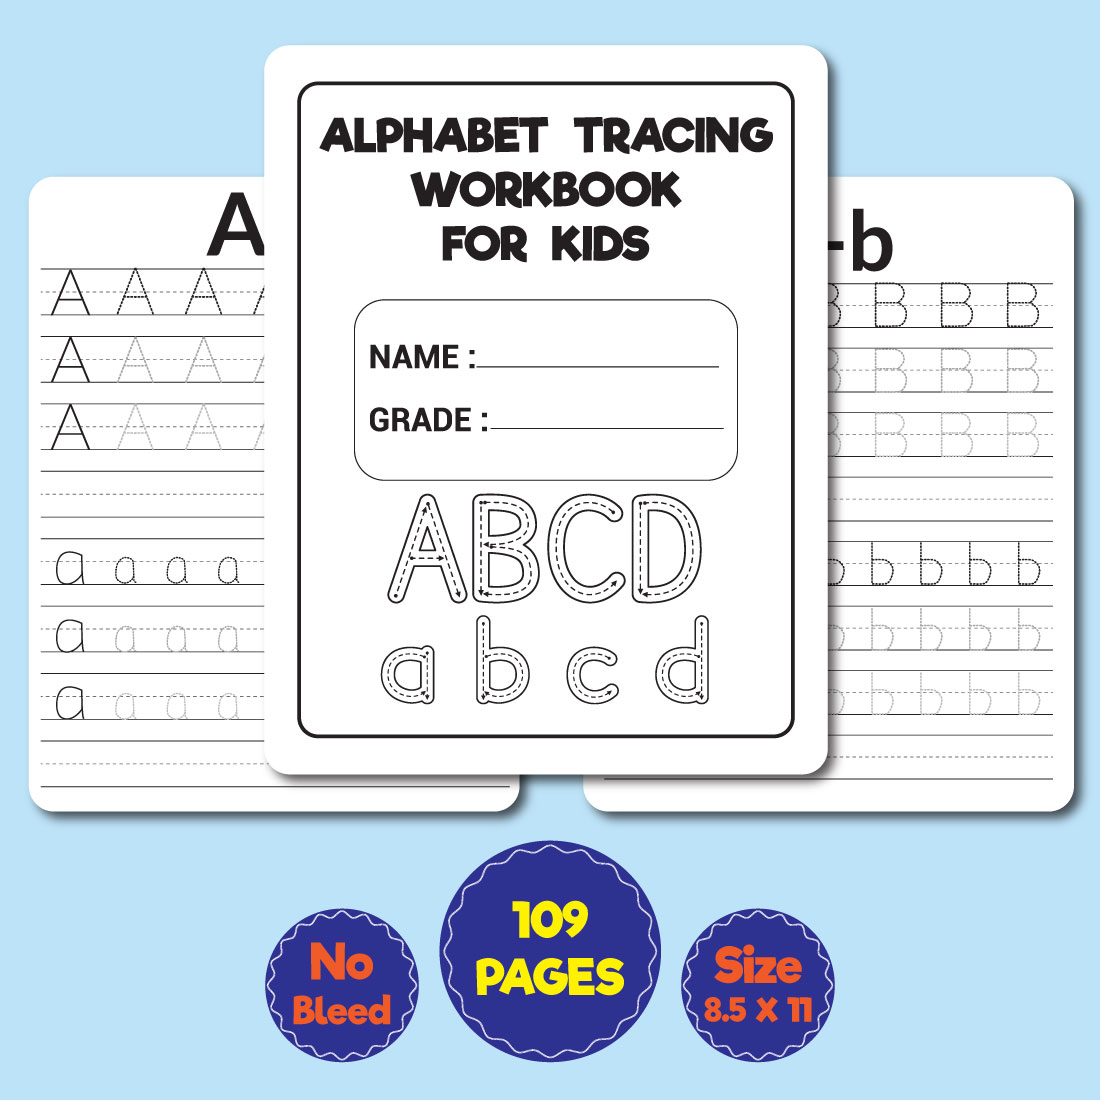 Alphabet Tracing Workbook For Kids main cover.